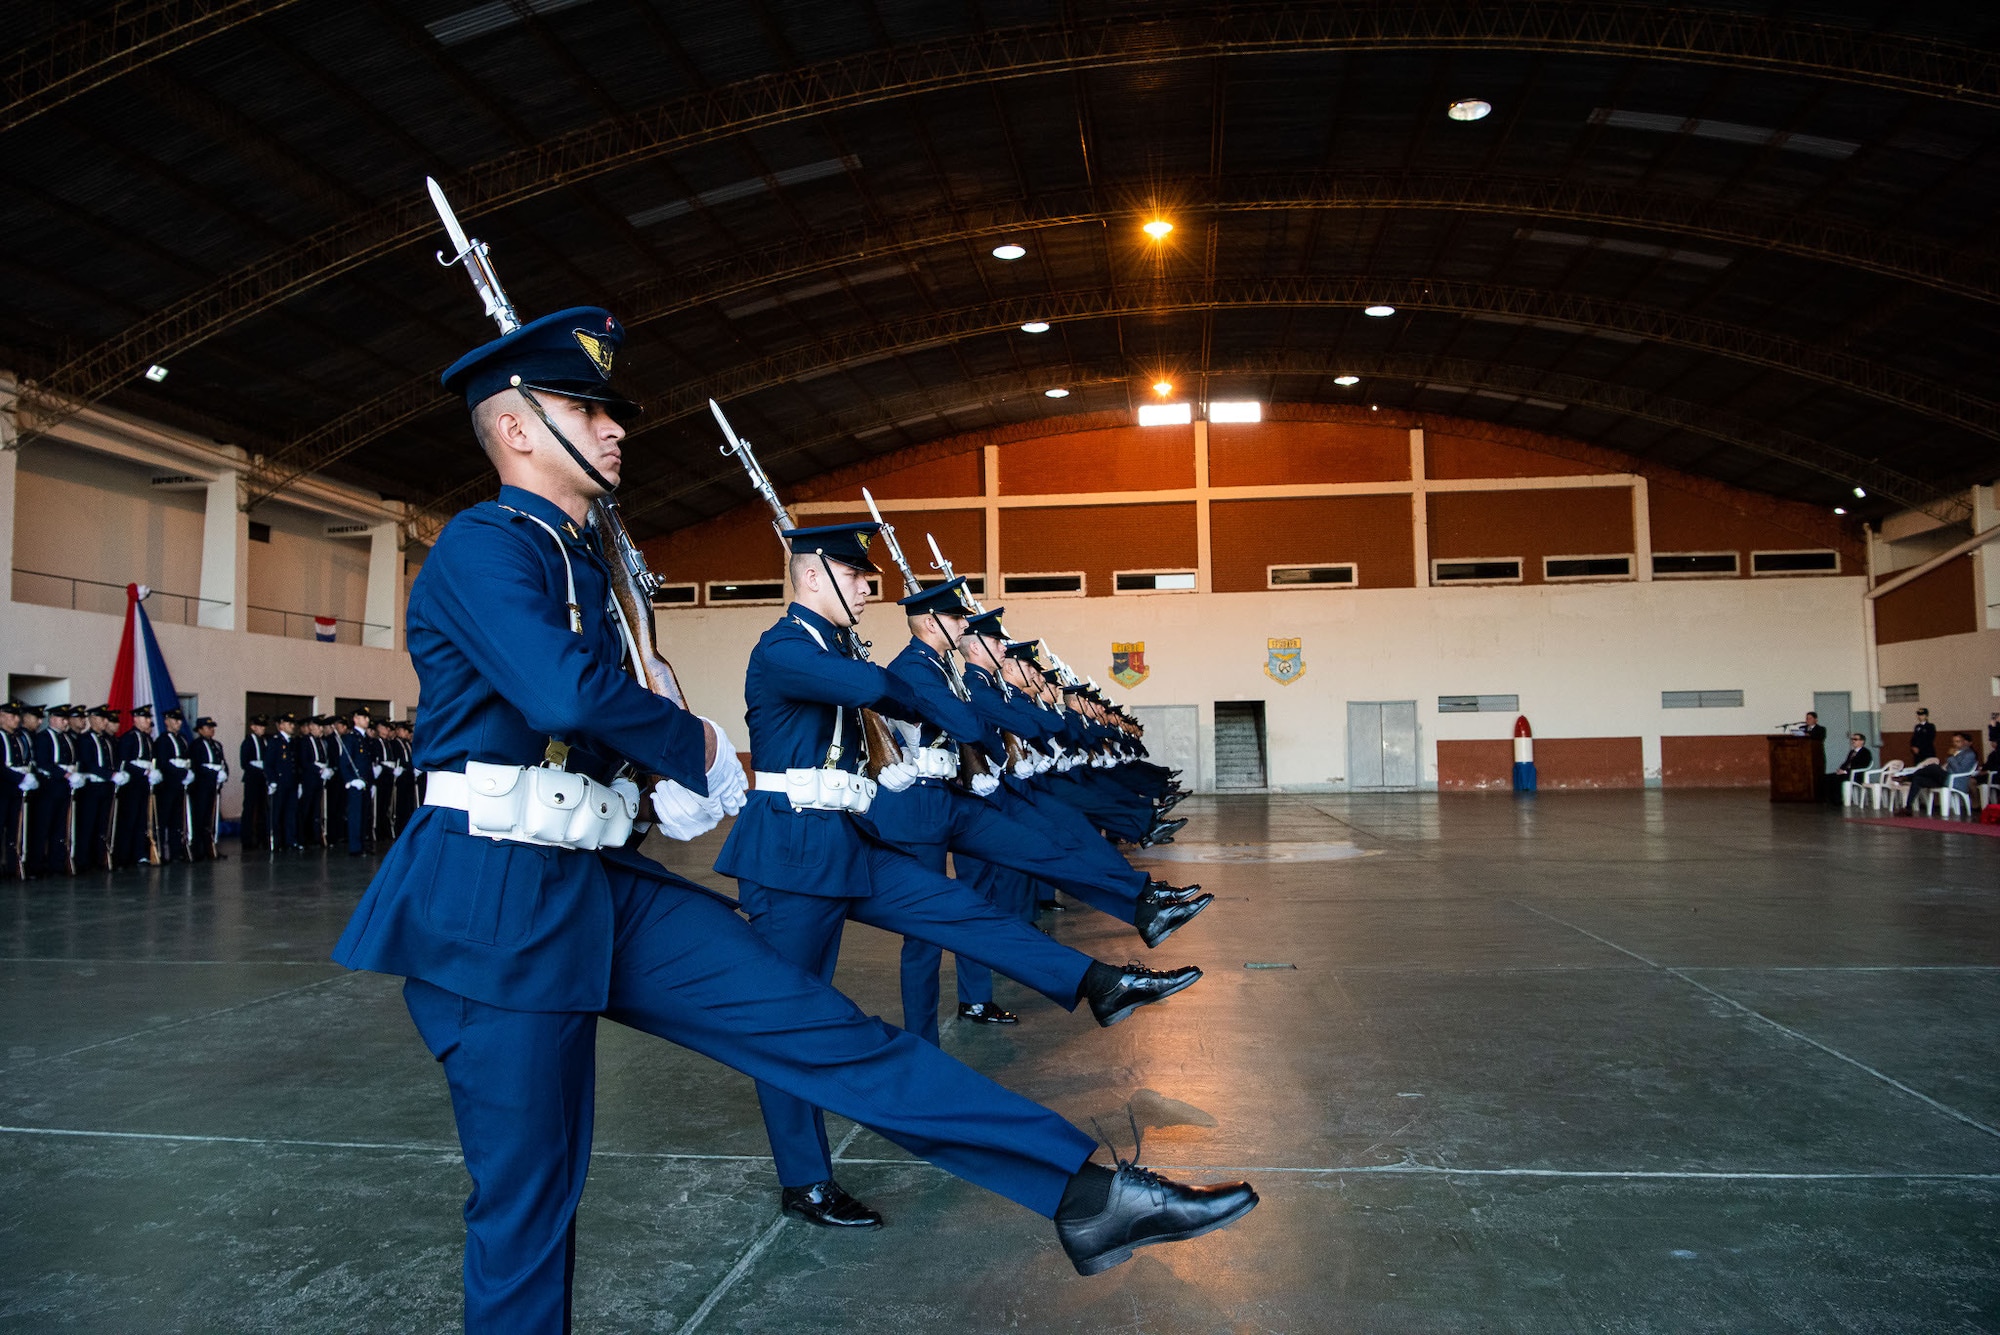 Drill team members kick during a performance